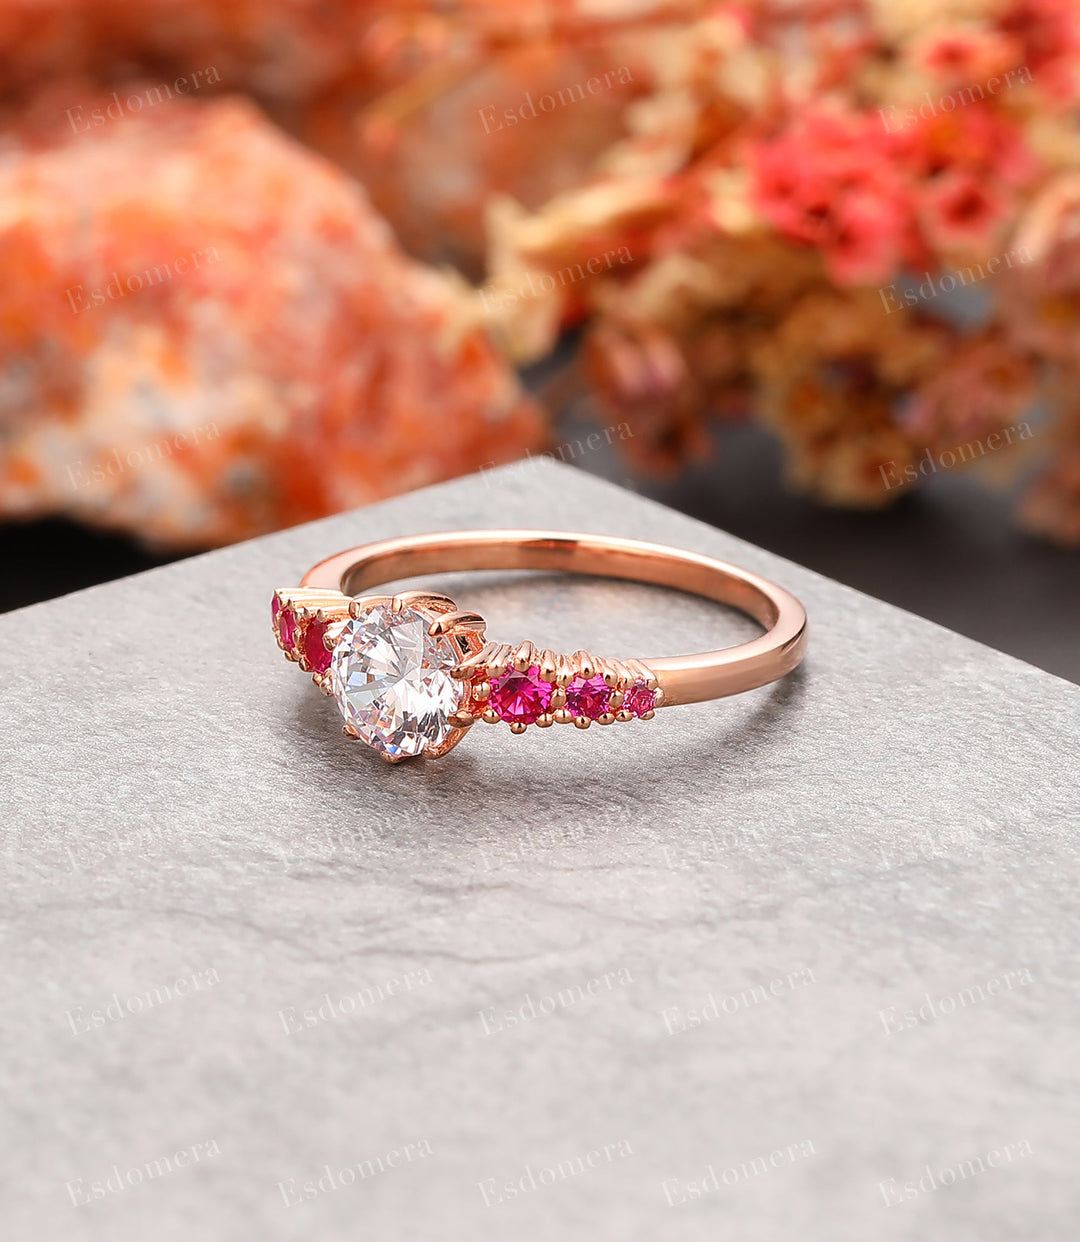 Art Deco Round Cut Moissanite Anniversary Ring For Women, Rubies Accents Promise Ring, 14k Rose Gold Engagement Ring